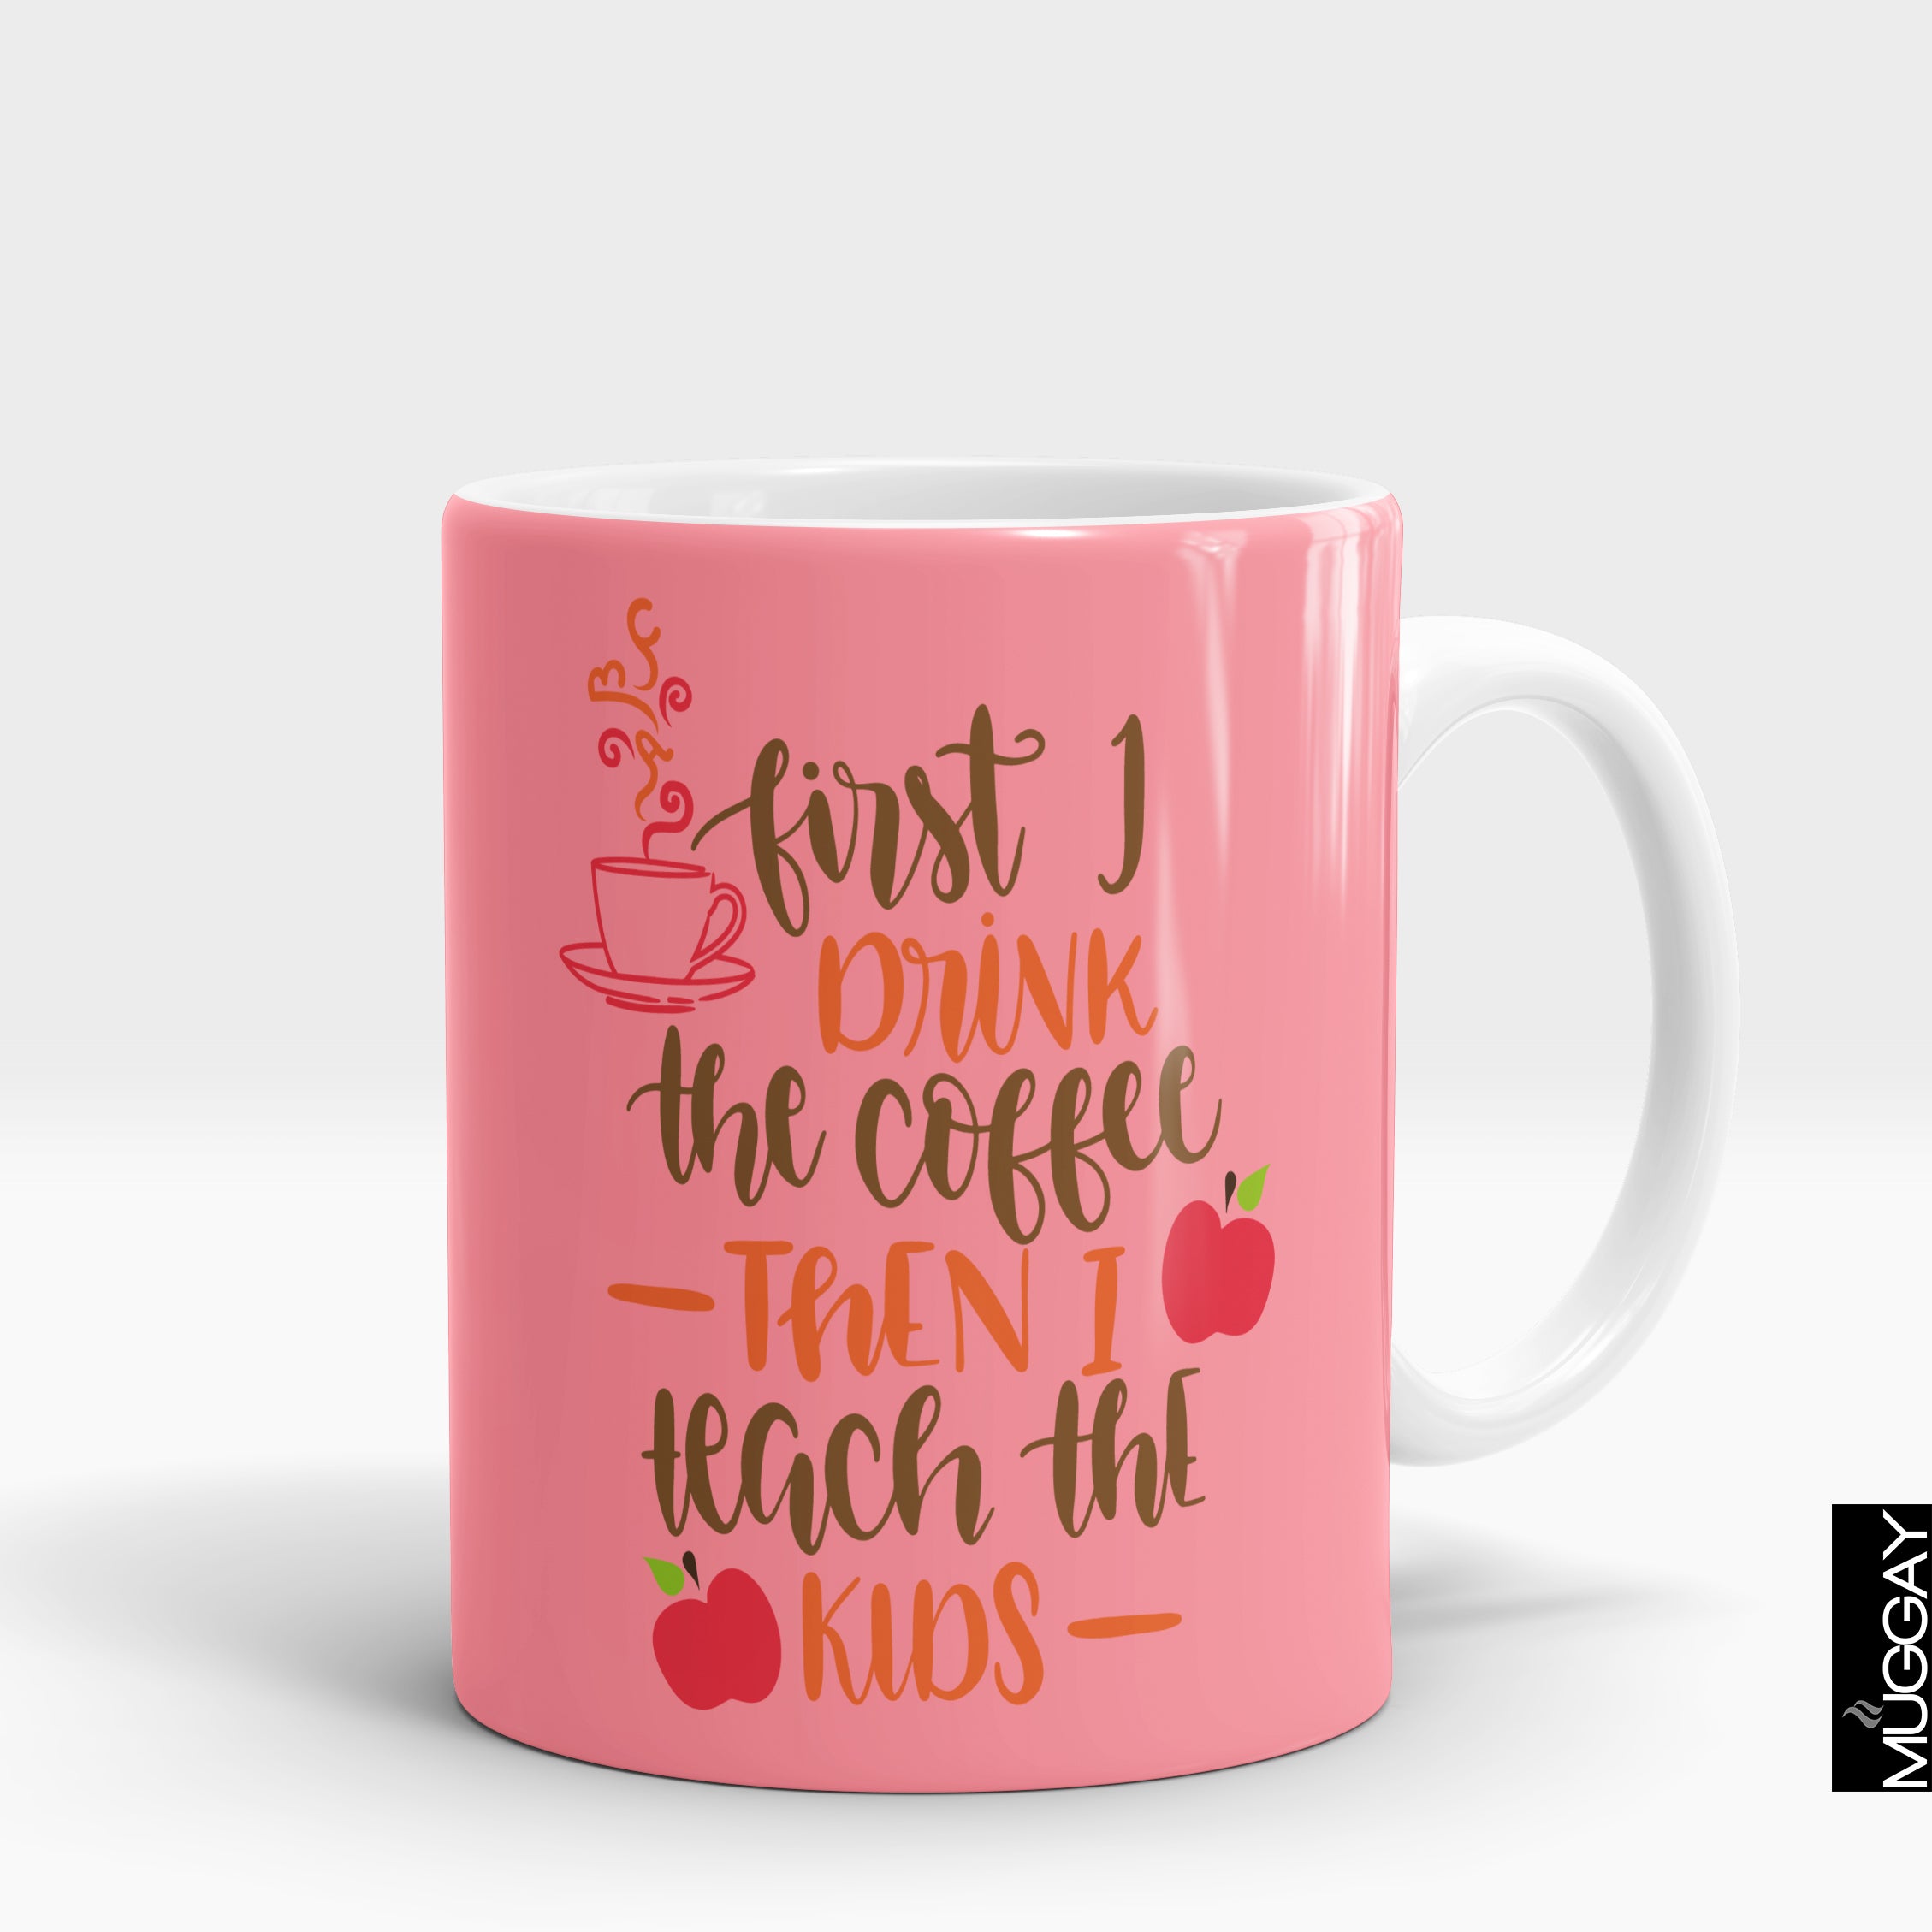 First i drink the coffee then i teach the kids